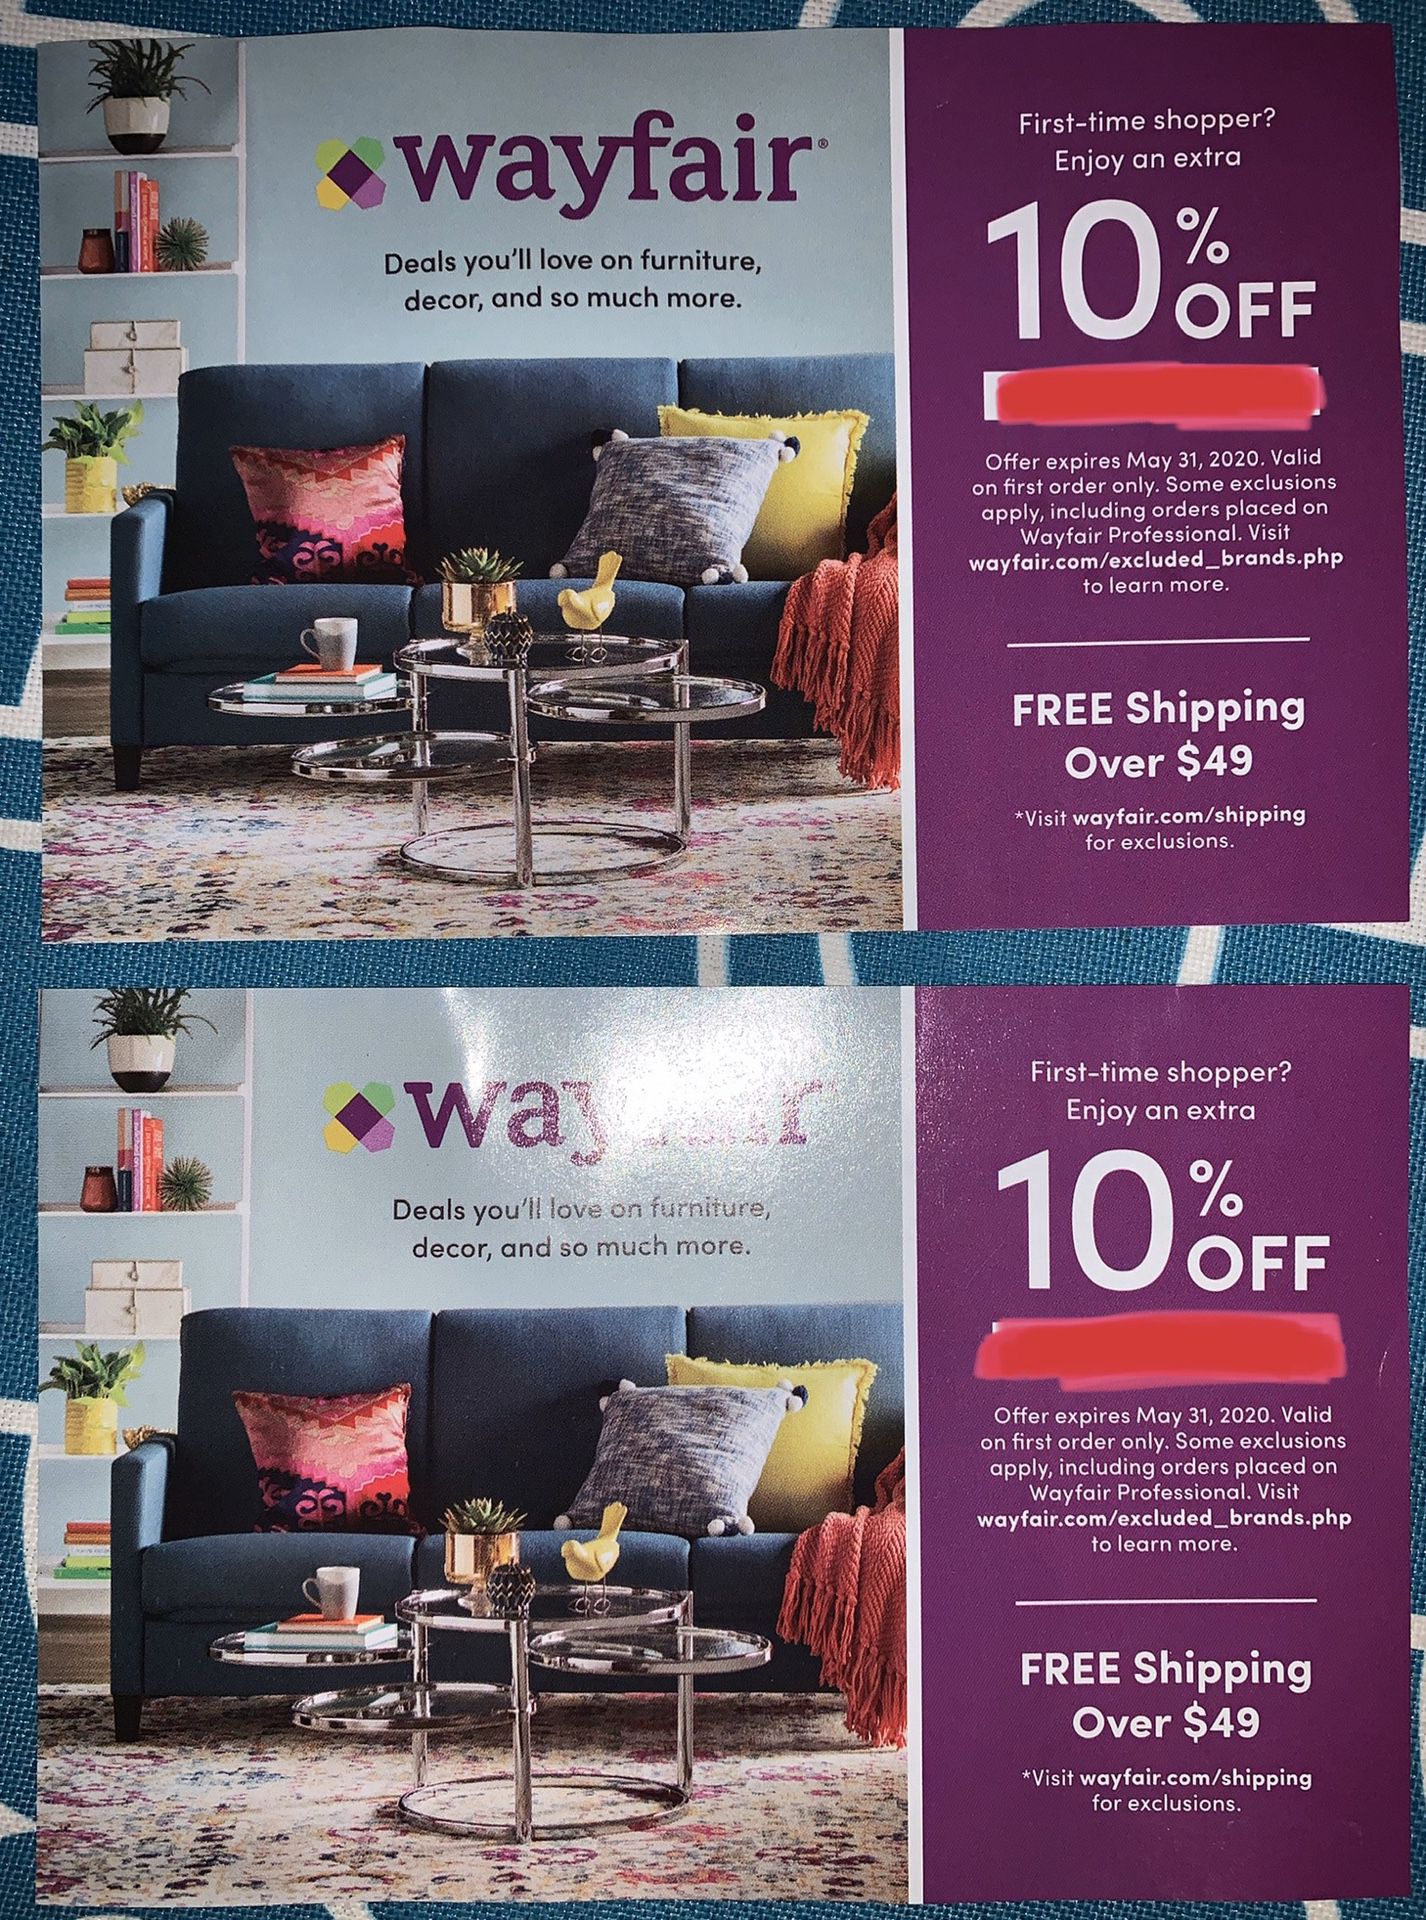 2 Brand new Wayfair coupons, 10% off, expires May 31, 2020